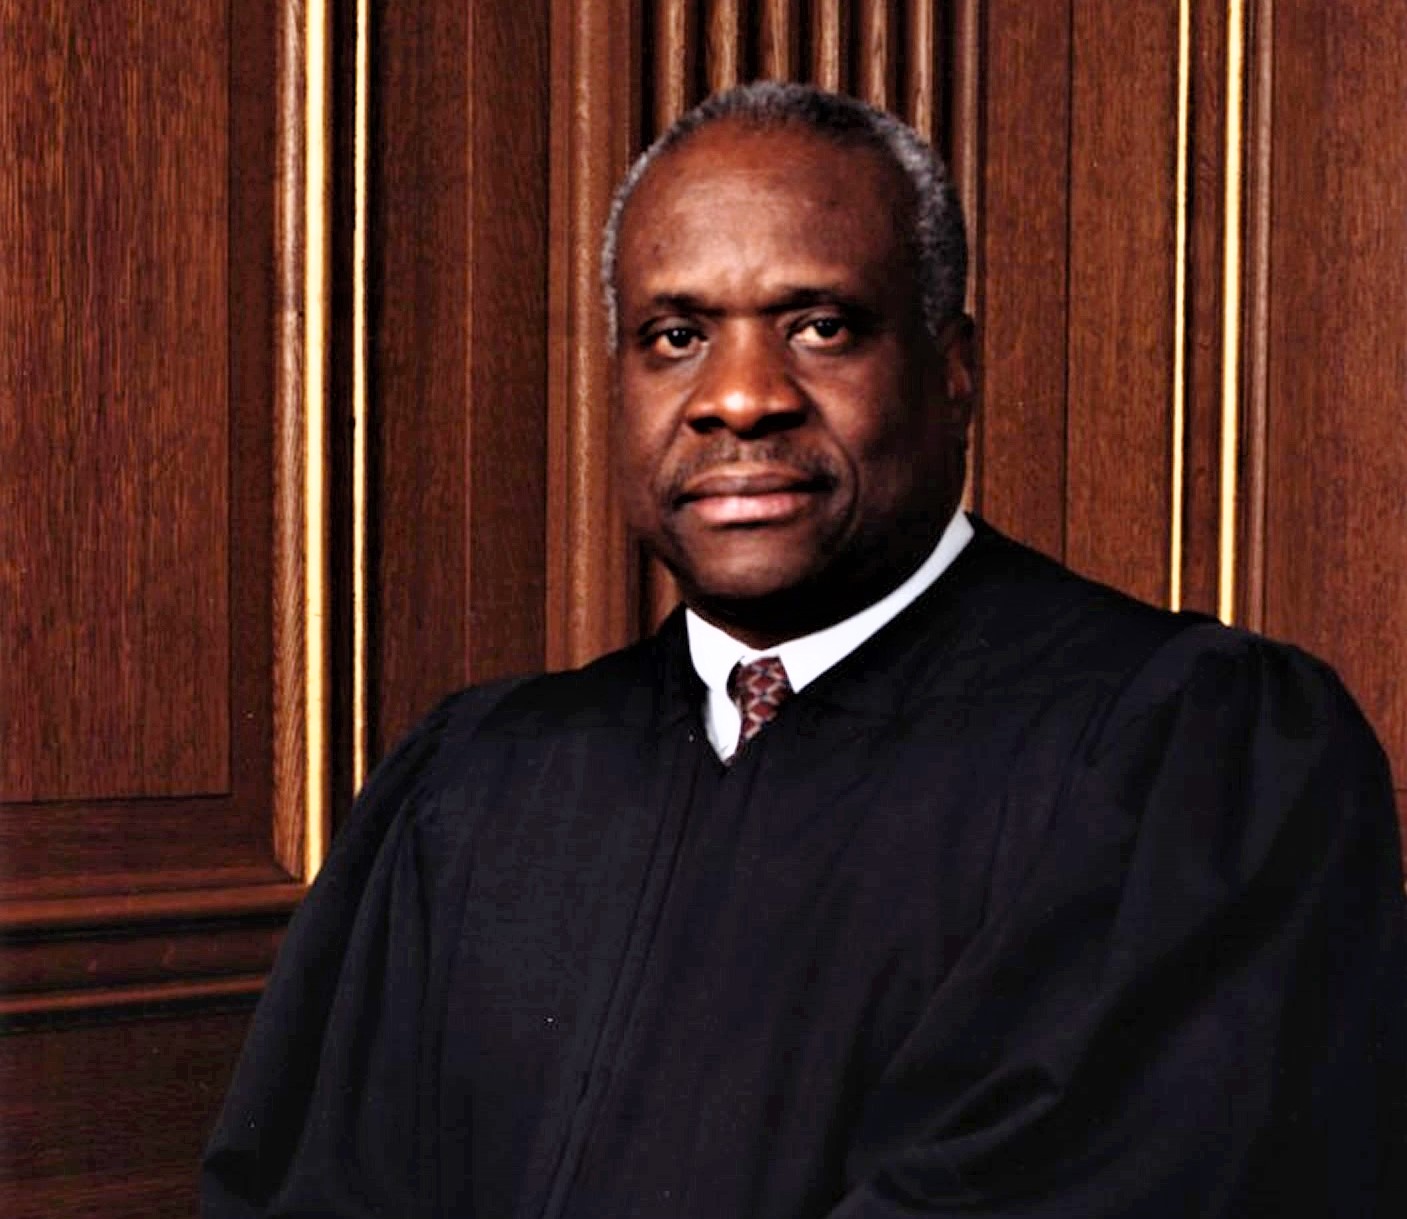 Senate committee reports Justice Clarence Thomas did not pay back $200,000 loan for RV